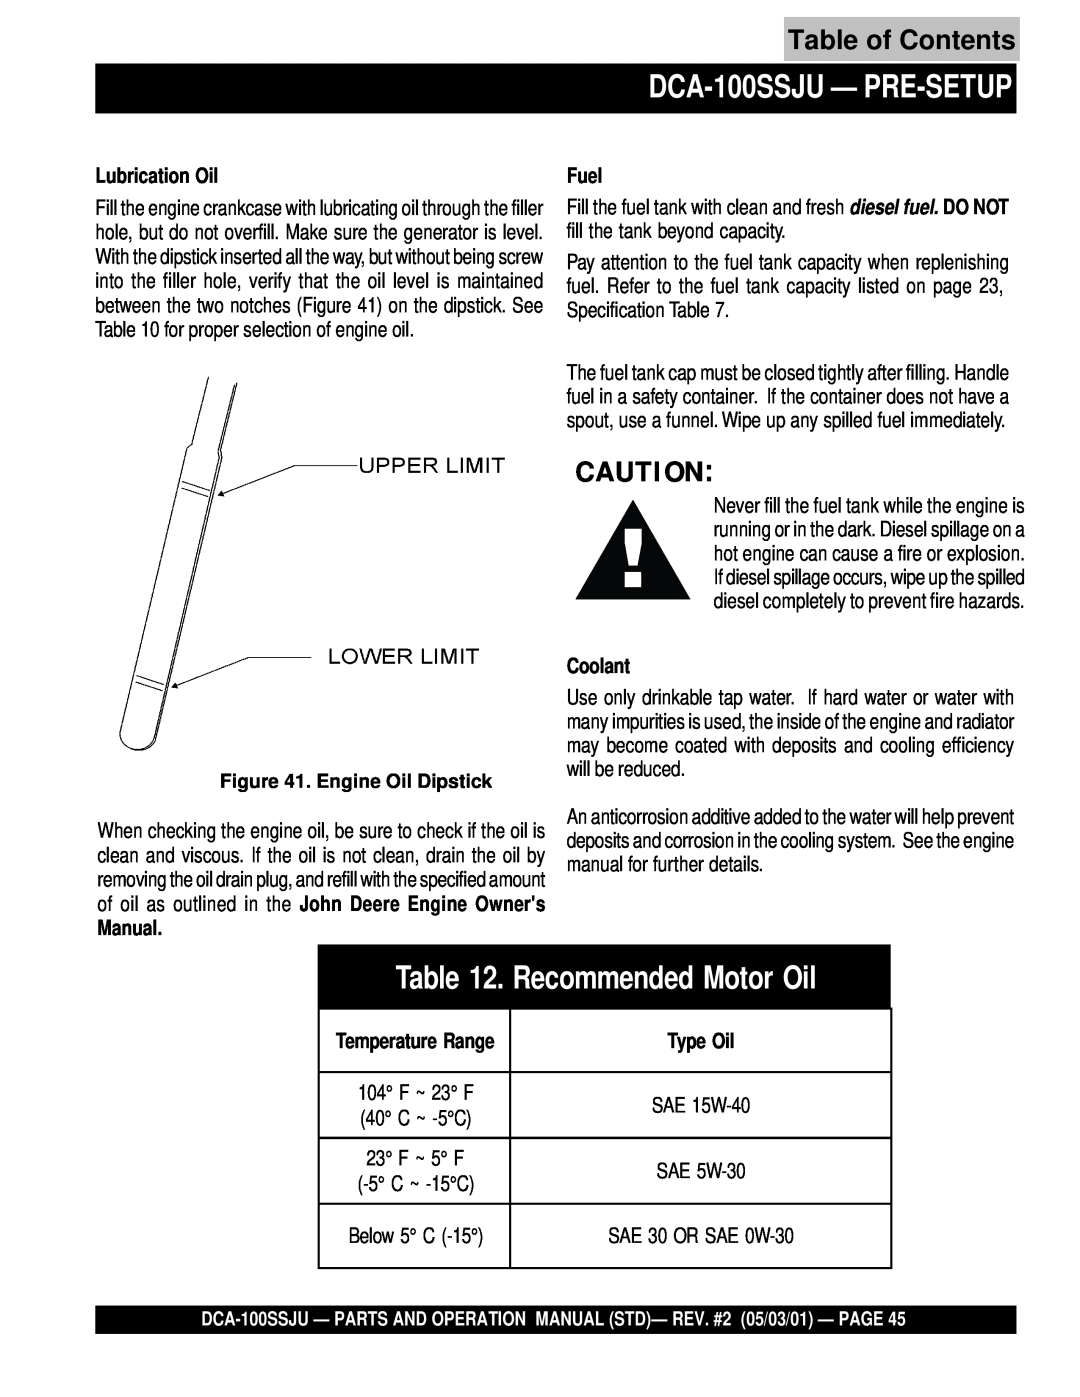 Multiquip operation manual Recommended Motor Oil, DCA-100SSJU— PRE-SETUP, Table of Contents 